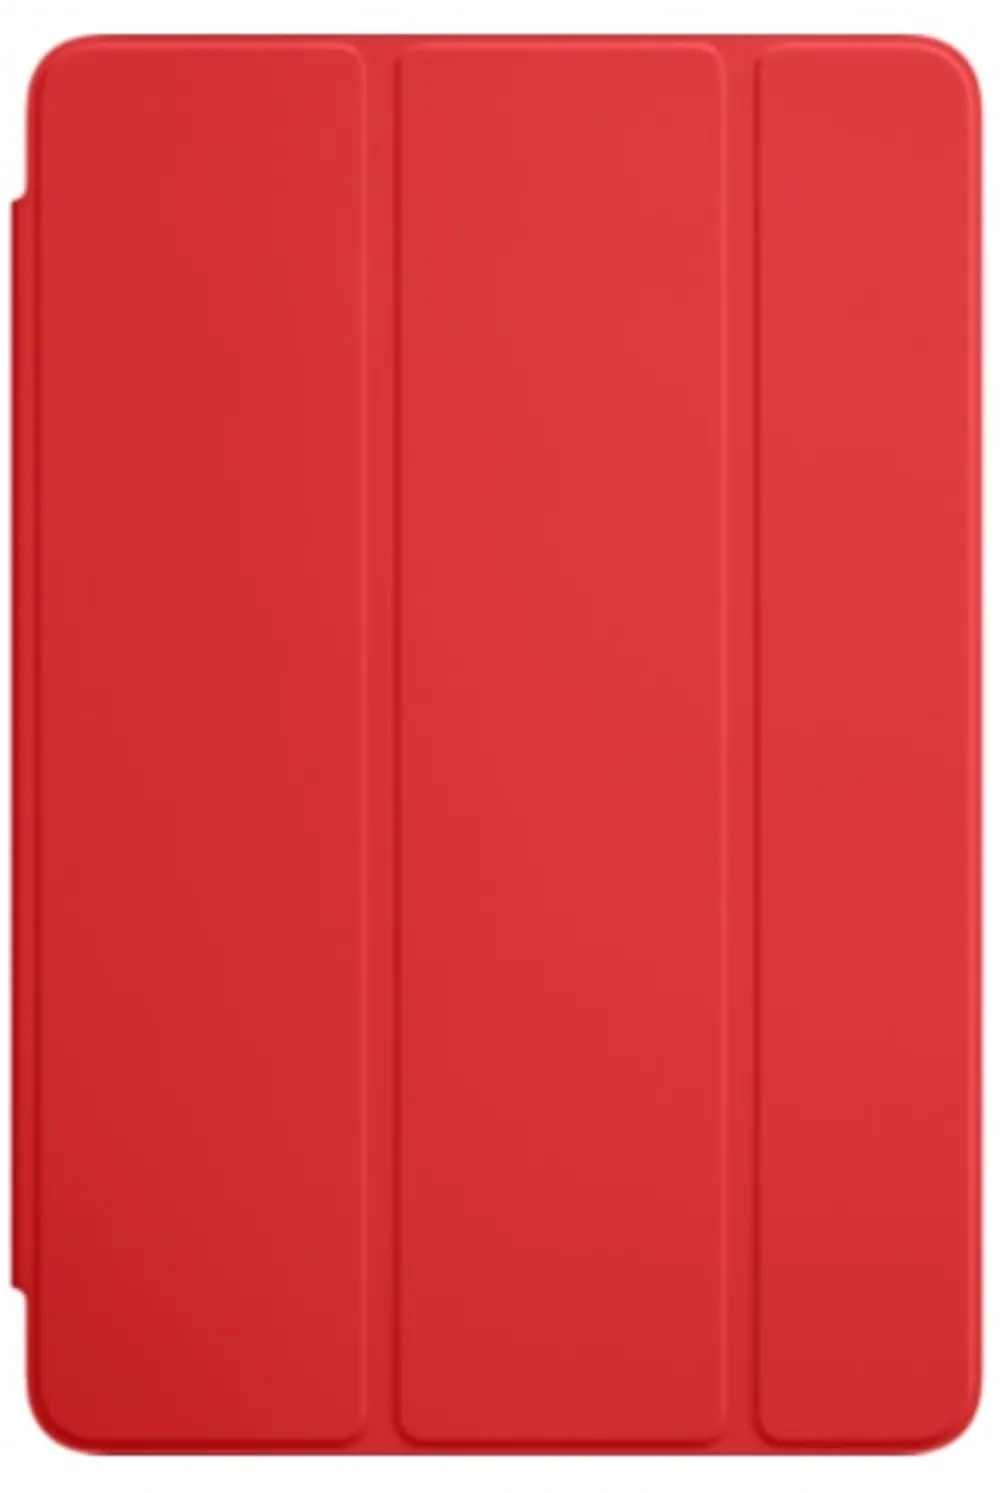 MKLY2ZM/A iPad Mini 4 Smart Cover - Red-1